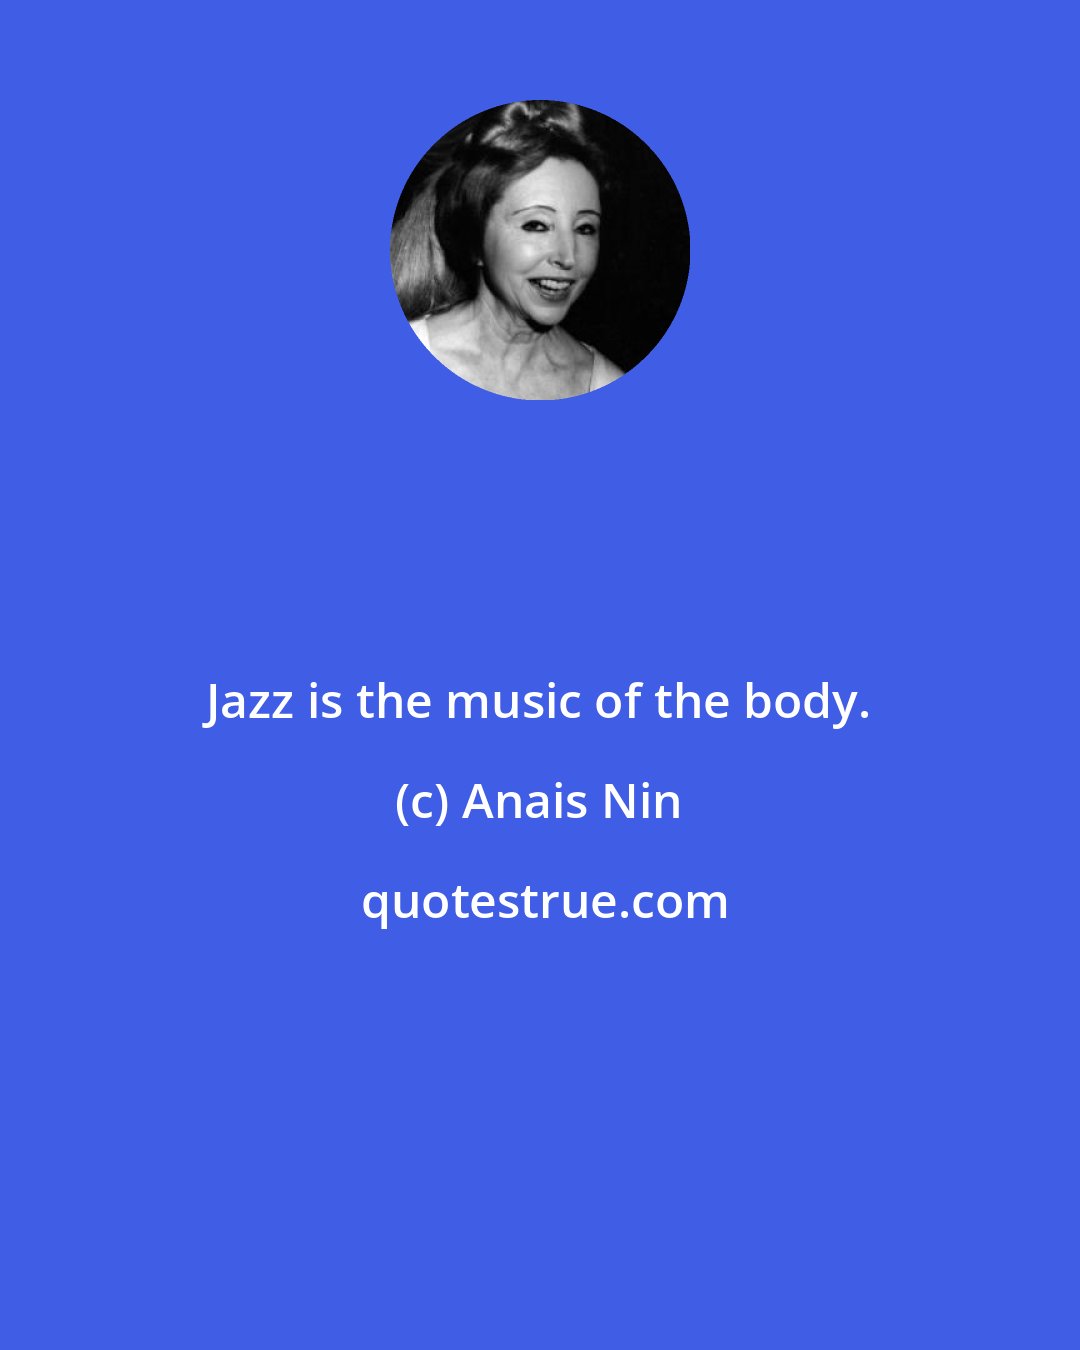 Anais Nin: Jazz is the music of the body.